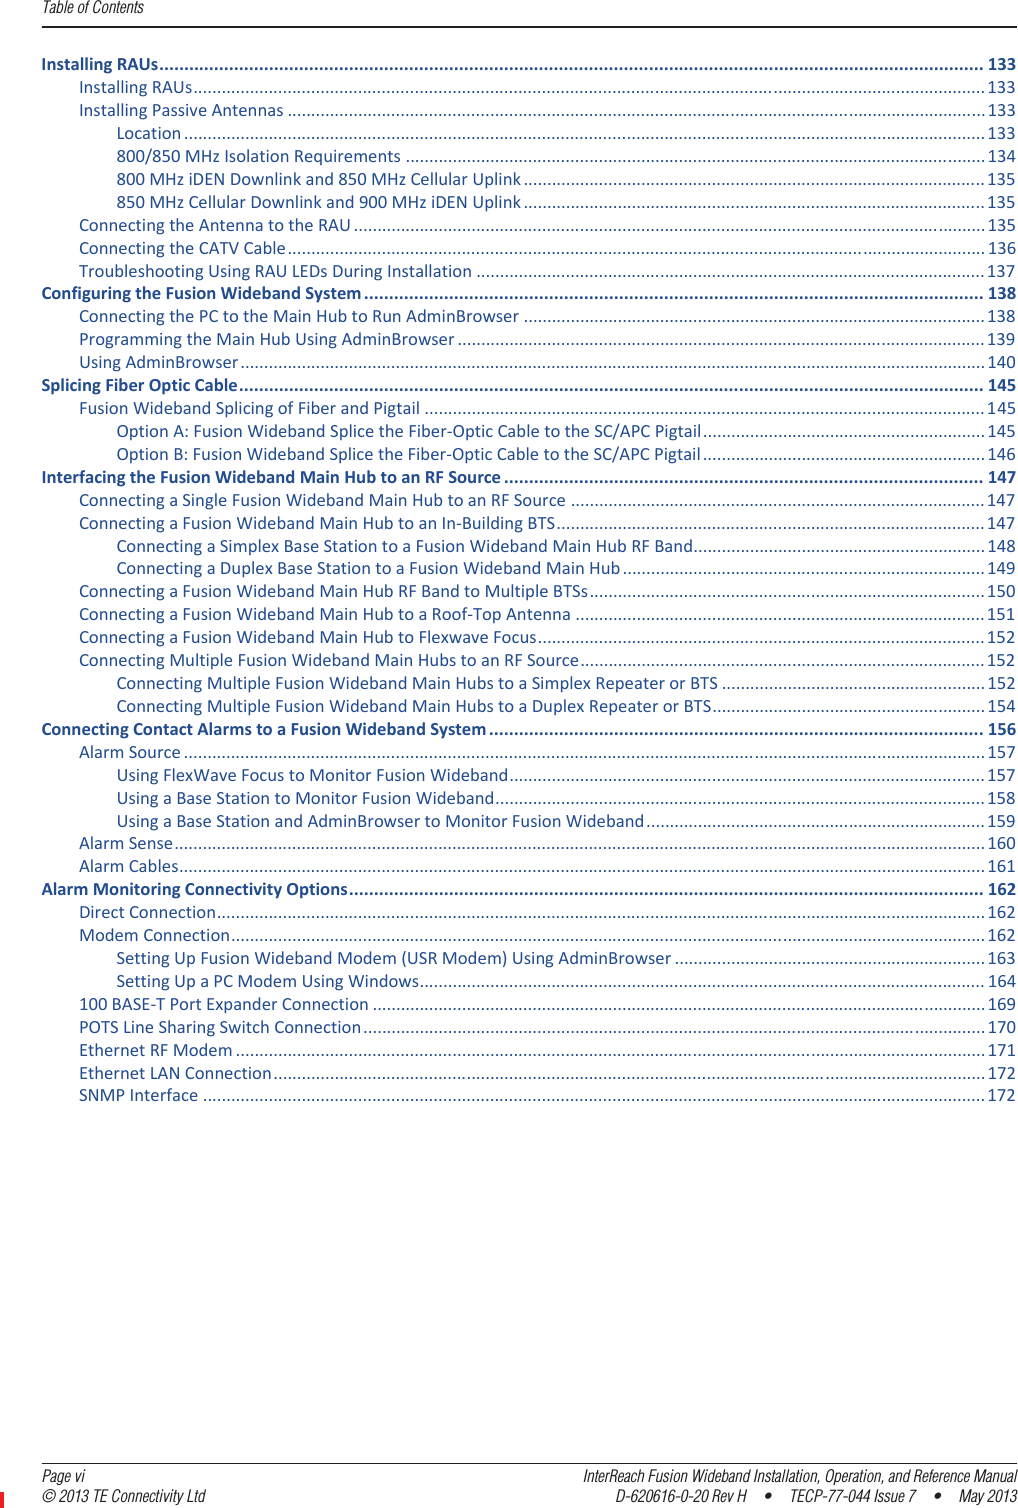 Table of Contents  Page vi InterReach Fusion Wideband Installation, Operation, and Reference Manual© 2013 TE Connectivity Ltd D-620616-0-20 Rev H  •  TECP-77-044 Issue 7  •  May 2013InstallingRAUs..................................................................................................................................................................... 133InstallingRAUs........................................................................................................................................................................133InstallingPassiveAntennas .................................................................................................................................................... 133Location ..........................................................................................................................................................................133800/850MHzIsolationRequirements ........................................................................................................................... 134800MHziDENDownlinkand850MHzCellularUplink .................................................................................................. 135850MHzCellularDownlinkand900MHziDENUplink .................................................................................................. 135ConnectingtheAntennatotheRAU ......................................................................................................................................135ConnectingtheCATVCable.................................................................................................................................................... 136TroubleshootingUsingRAULEDsDuringInstallation ............................................................................................................137ConfiguringtheFusionWidebandSystem ............................................................................................................................ 138ConnectingthePCtotheMainHubtoRunAdminBrowser .................................................................................................. 138ProgrammingtheMainHubUsingAdminBrowser ................................................................................................................139UsingAdminBrowser..............................................................................................................................................................140SplicingFiberOpticCable..................................................................................................................................................... 145FusionWidebandSplicingofFiberandPigtail .......................................................................................................................145OptionA:FusionWidebandSplicetheFiberͲOpticCabletotheSC/APCPigtail............................................................145OptionB:FusionWidebandSplicetheFiberͲOpticCabletotheSC/APCPigtail............................................................146InterfacingtheFusionWidebandMainHubtoanRFSource ................................................................................................ 147ConnectingaSingleFusionWidebandMainHubtoanRFSource ........................................................................................147ConnectingaFusionWidebandMainHubtoanInͲBuildingBTS...........................................................................................147ConnectingaSimplexBaseStationtoaFusionWidebandMainHubRFBand..............................................................148ConnectingaDuplexBaseStationtoaFusionWidebandMainHub .............................................................................149ConnectingaFusionWidebandMainHubRFBandtoMultipleBTSs....................................................................................150ConnectingaFusionWidebandMainHubtoaRoofͲTopAntenna .......................................................................................151ConnectingaFusionWidebandMainHubtoFlexwaveFocus...............................................................................................152ConnectingMultipleFusionWidebandMainHubstoanRFSource......................................................................................152ConnectingMultipleFusionWidebandMainHubstoaSimplexRepeaterorBTS ........................................................ 152ConnectingMultipleFusionWidebandMainHubstoaDuplexRepeaterorBTS..........................................................154ConnectingContactAlarmstoaFusionWidebandSystem ................................................................................................... 156AlarmSource ..........................................................................................................................................................................157UsingFlexWaveFocustoMonitorFusionWideband..................................................................................................... 157UsingaBaseStationtoMonitorFusionWideband........................................................................................................ 158UsingaBaseStationandAdminBrowsertoMonitorFusionWideband........................................................................159AlarmSense............................................................................................................................................................................160AlarmCables...........................................................................................................................................................................161AlarmMonitoringConnectivityOptions............................................................................................................................... 162DirectConnection...................................................................................................................................................................162ModemConnection................................................................................................................................................................162SettingUpFusionWidebandModem(USRModem)UsingAdminBrowser ..................................................................163SettingUpaPCModemUsingWindows........................................................................................................................ 164100BASEͲTPortExpanderConnection ..................................................................................................................................169POTSLineSharingSwitchConnection....................................................................................................................................170EthernetRFModem ...............................................................................................................................................................171EthernetLANConnection.......................................................................................................................................................172SNMPInterface ......................................................................................................................................................................172